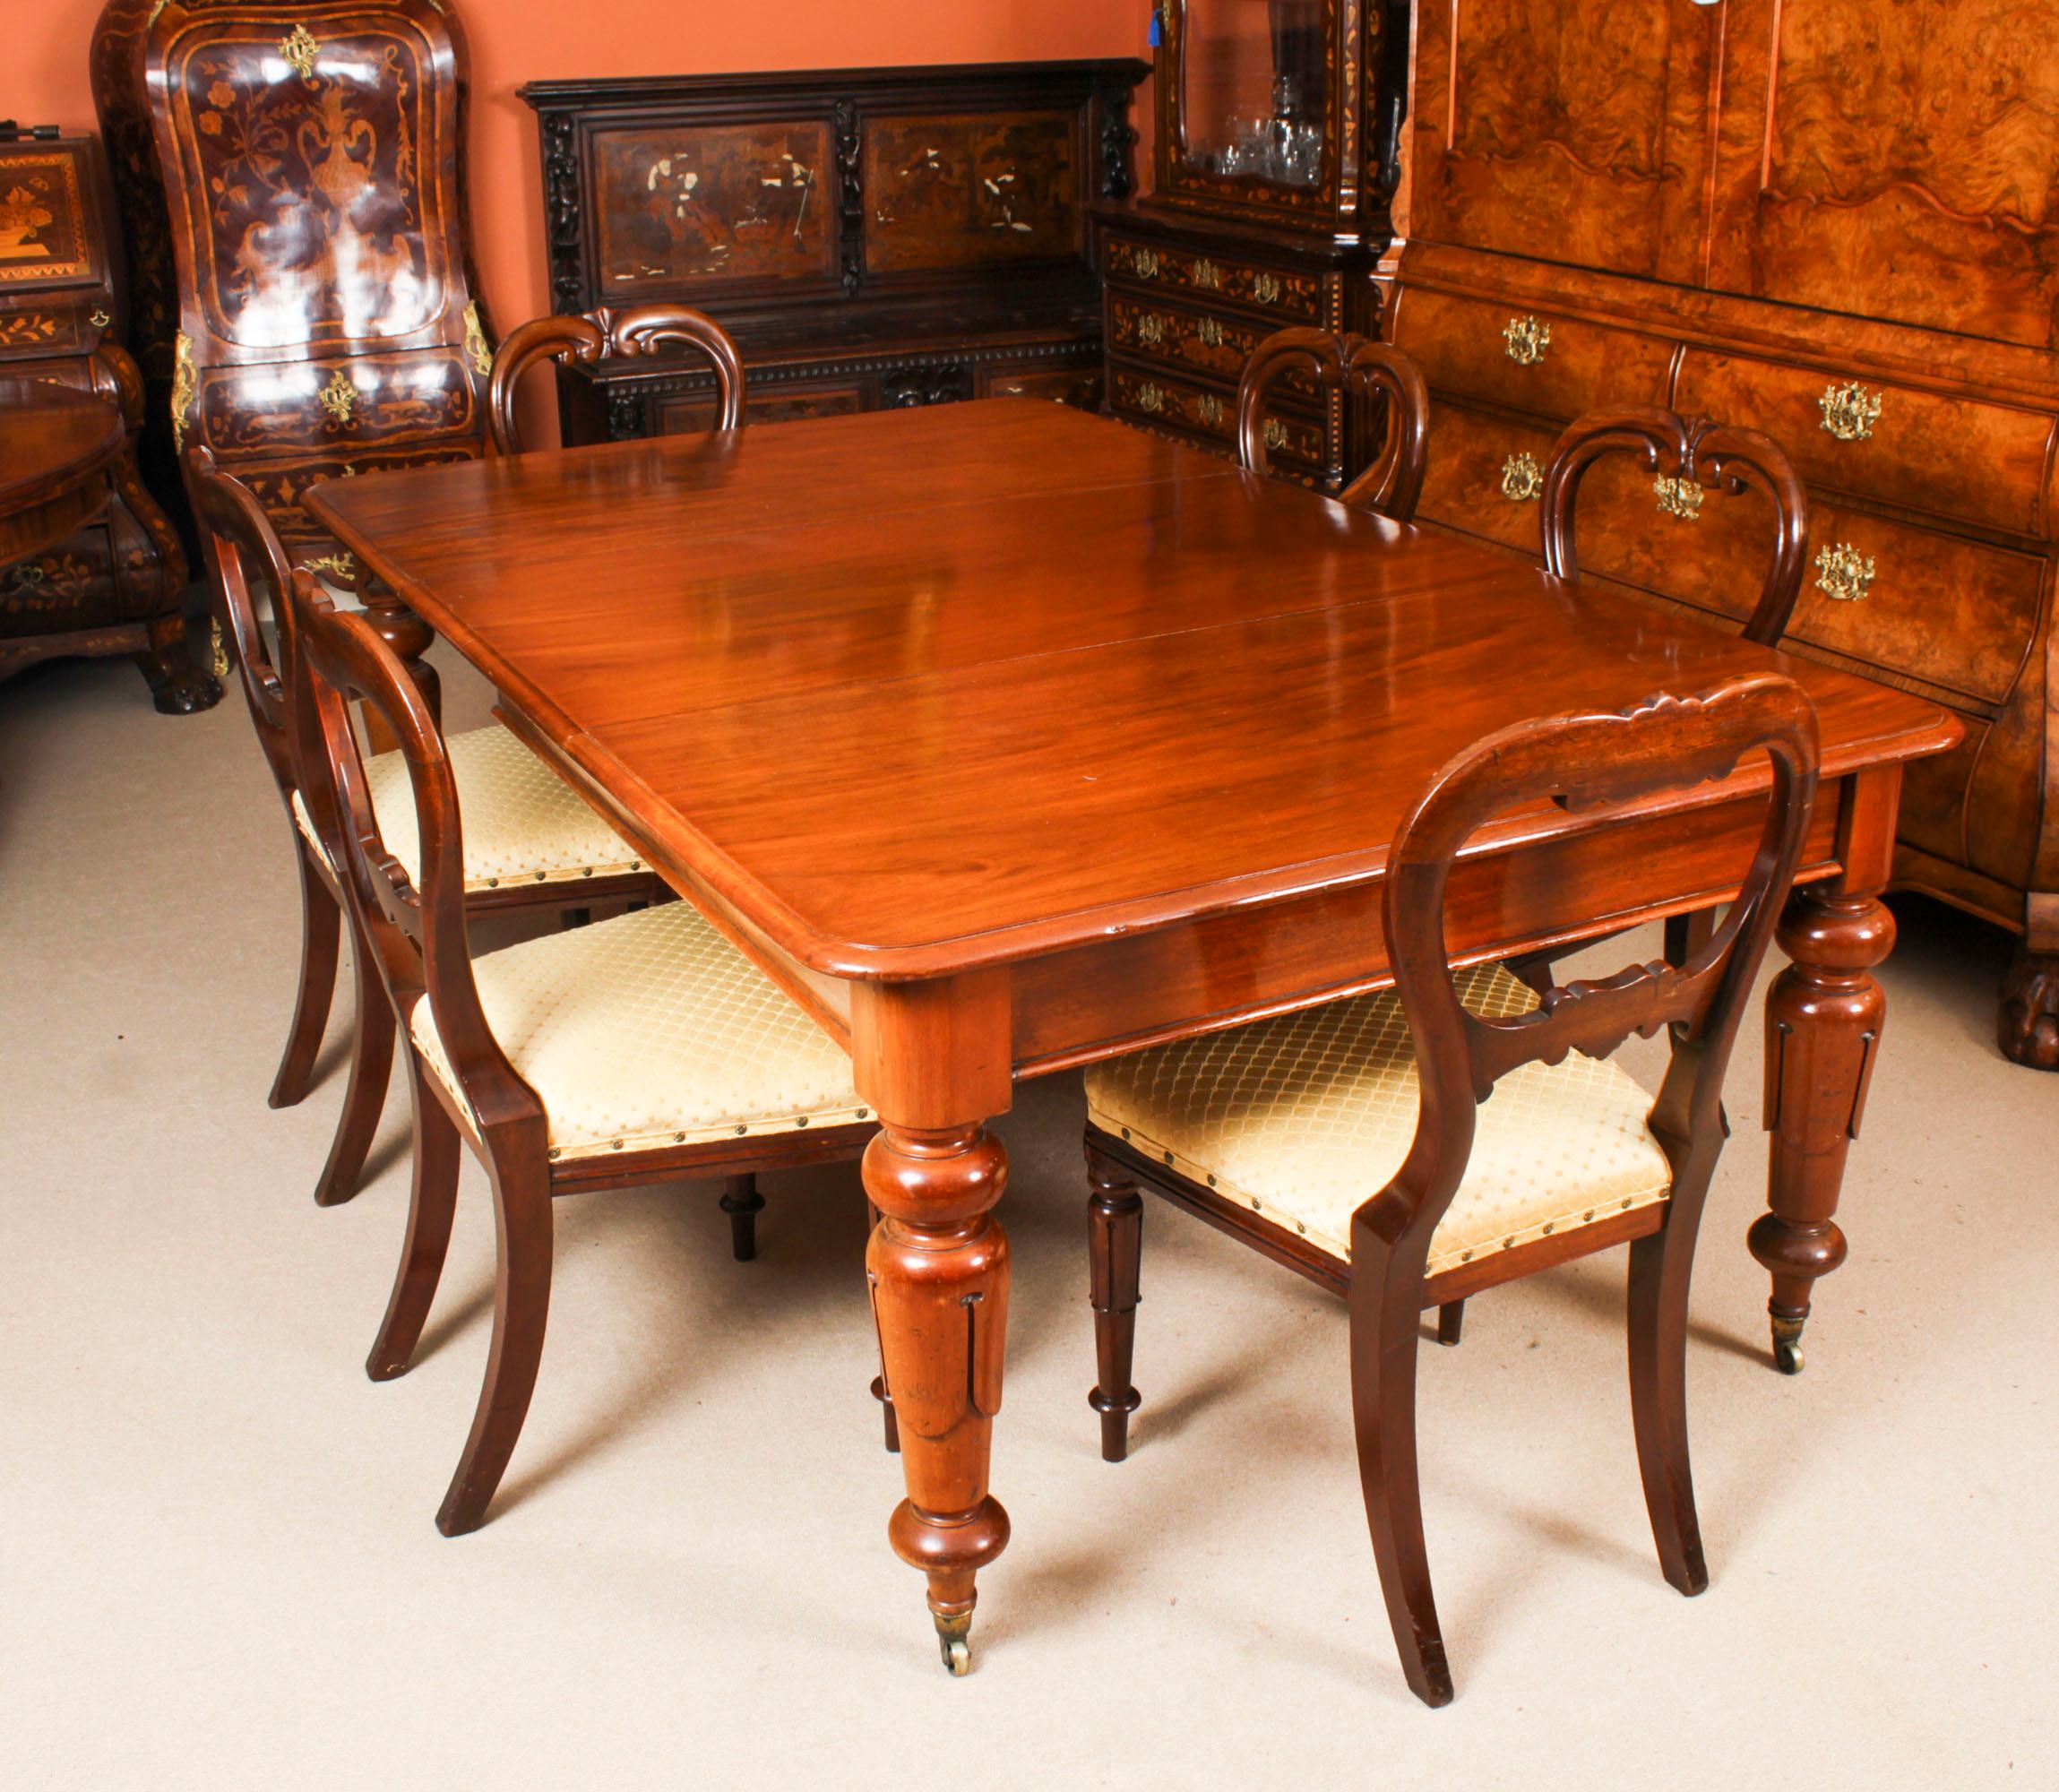 Antique Wiliam IV Mahogany Extending Dining Table & 6 chairs 19th Century 15